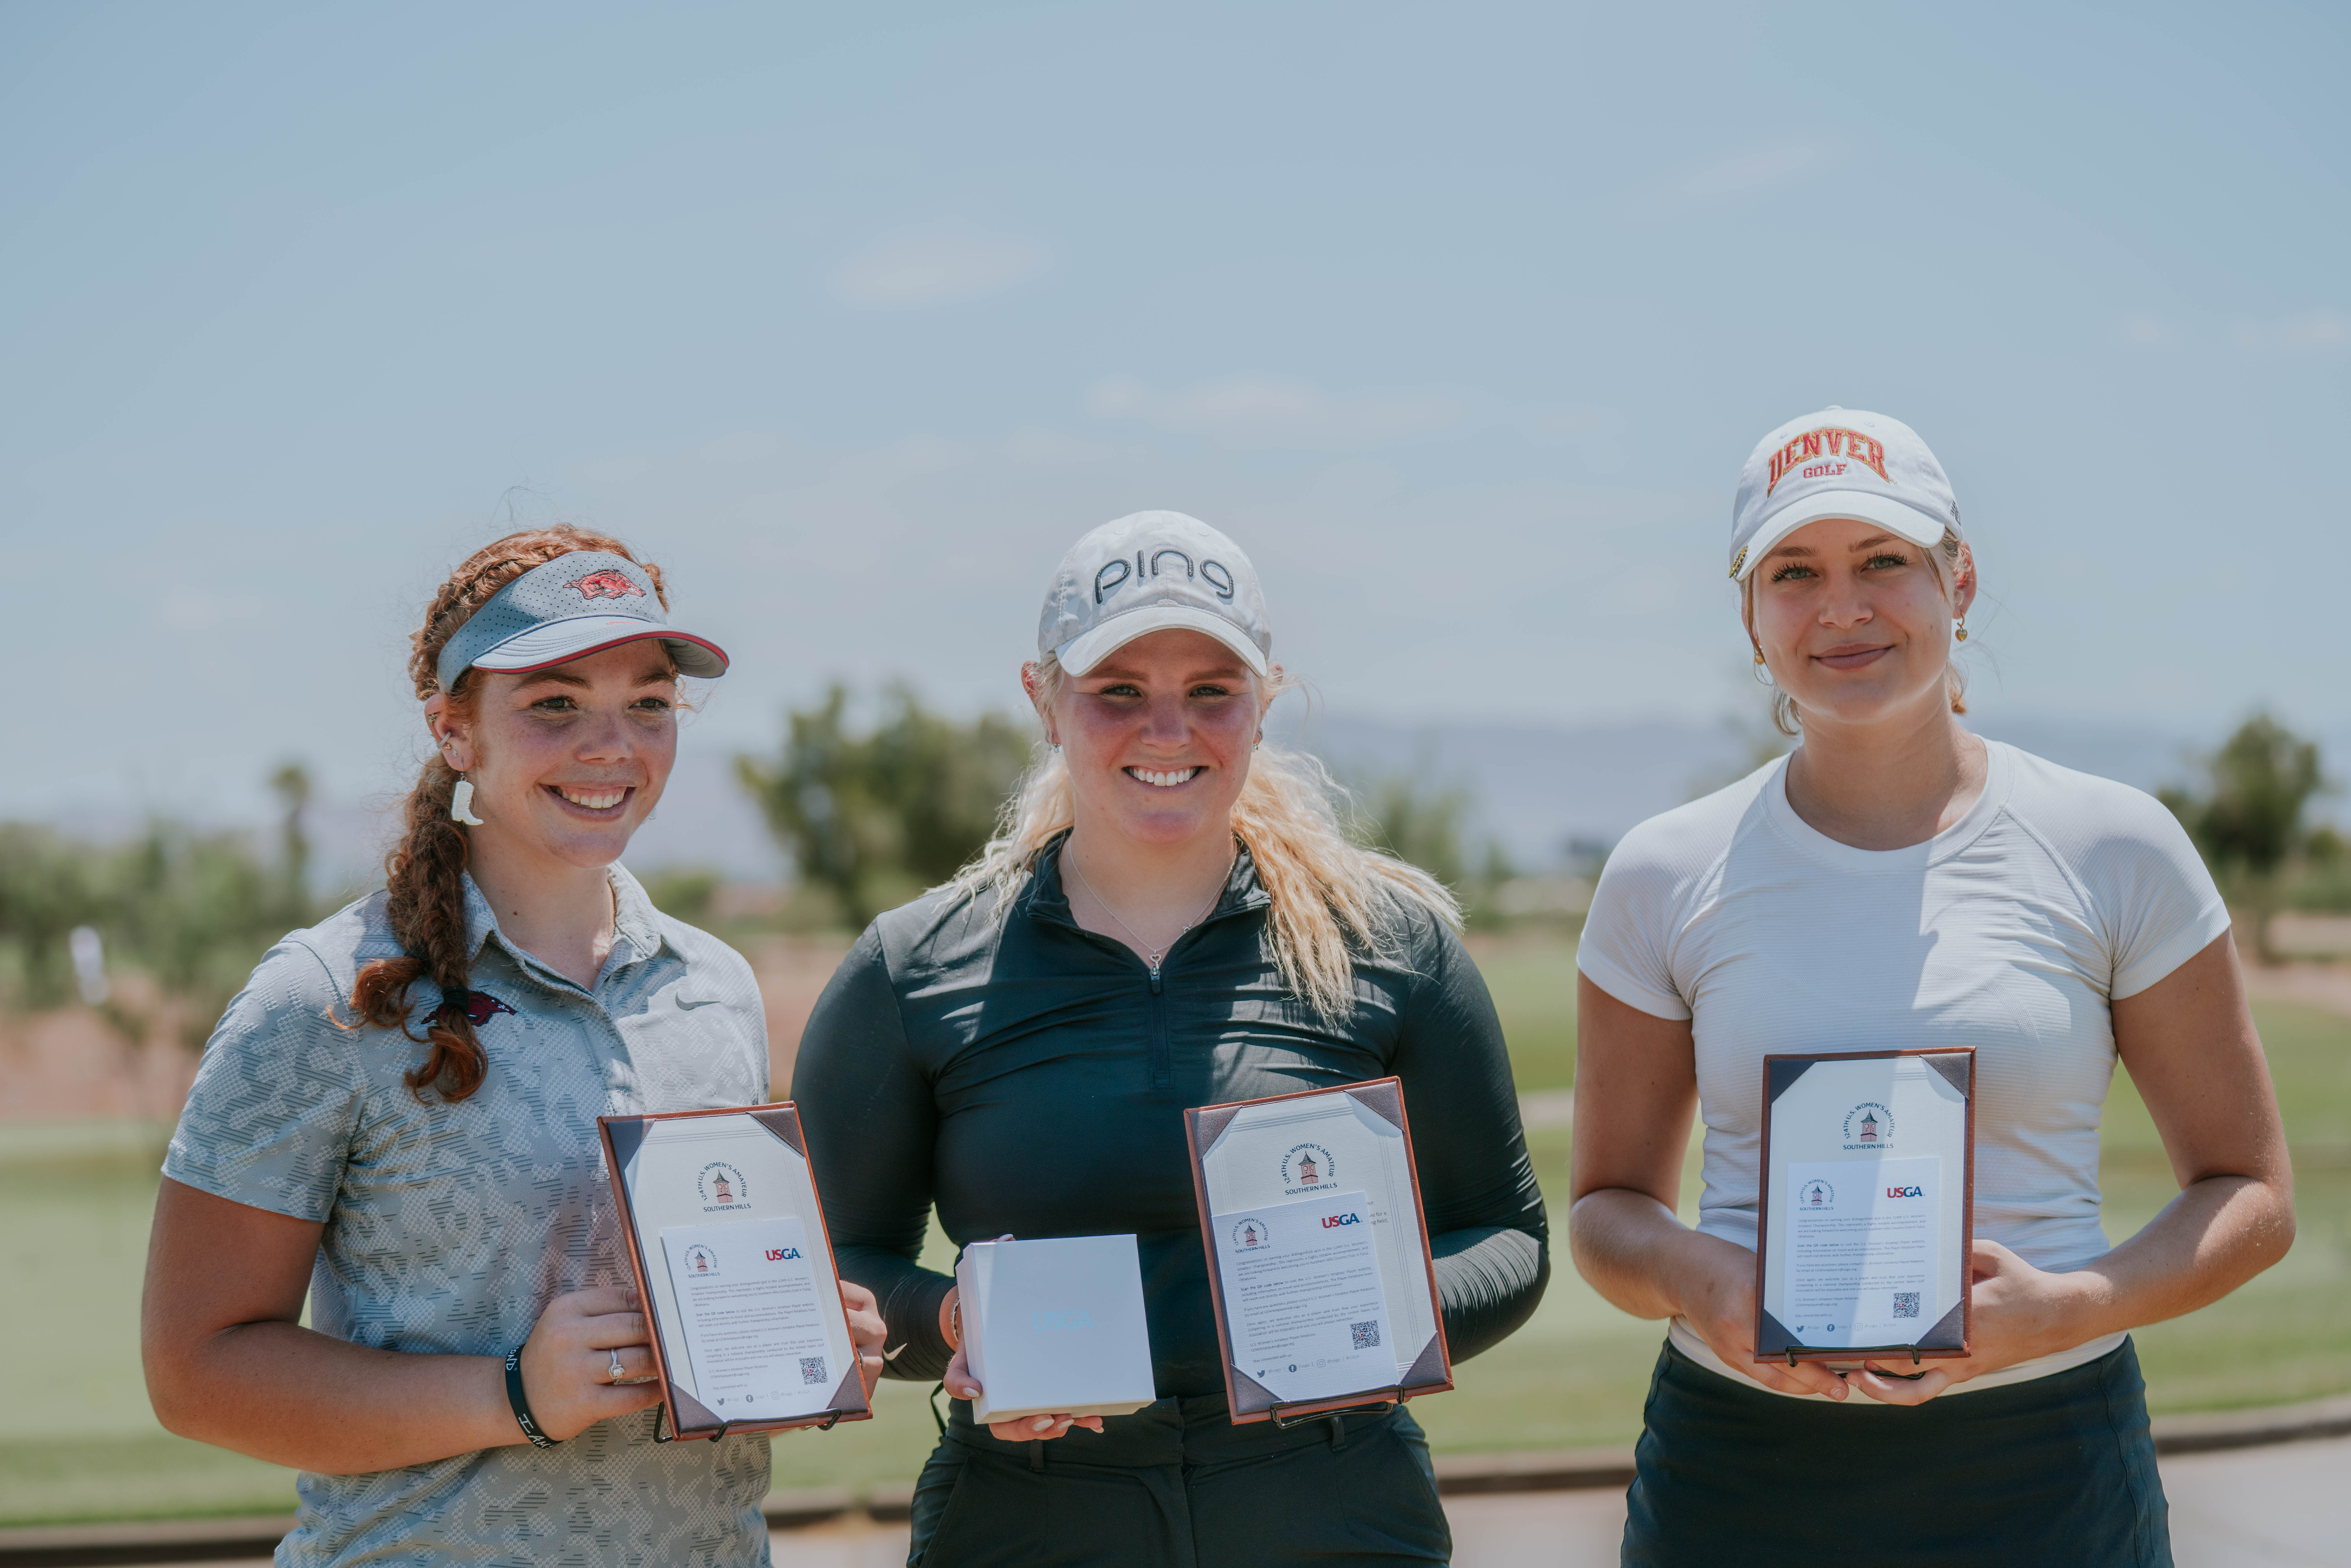 Todd, Capizzi and Schutte Claim Spots at the 2024 U.S. Women's Amateur Championship